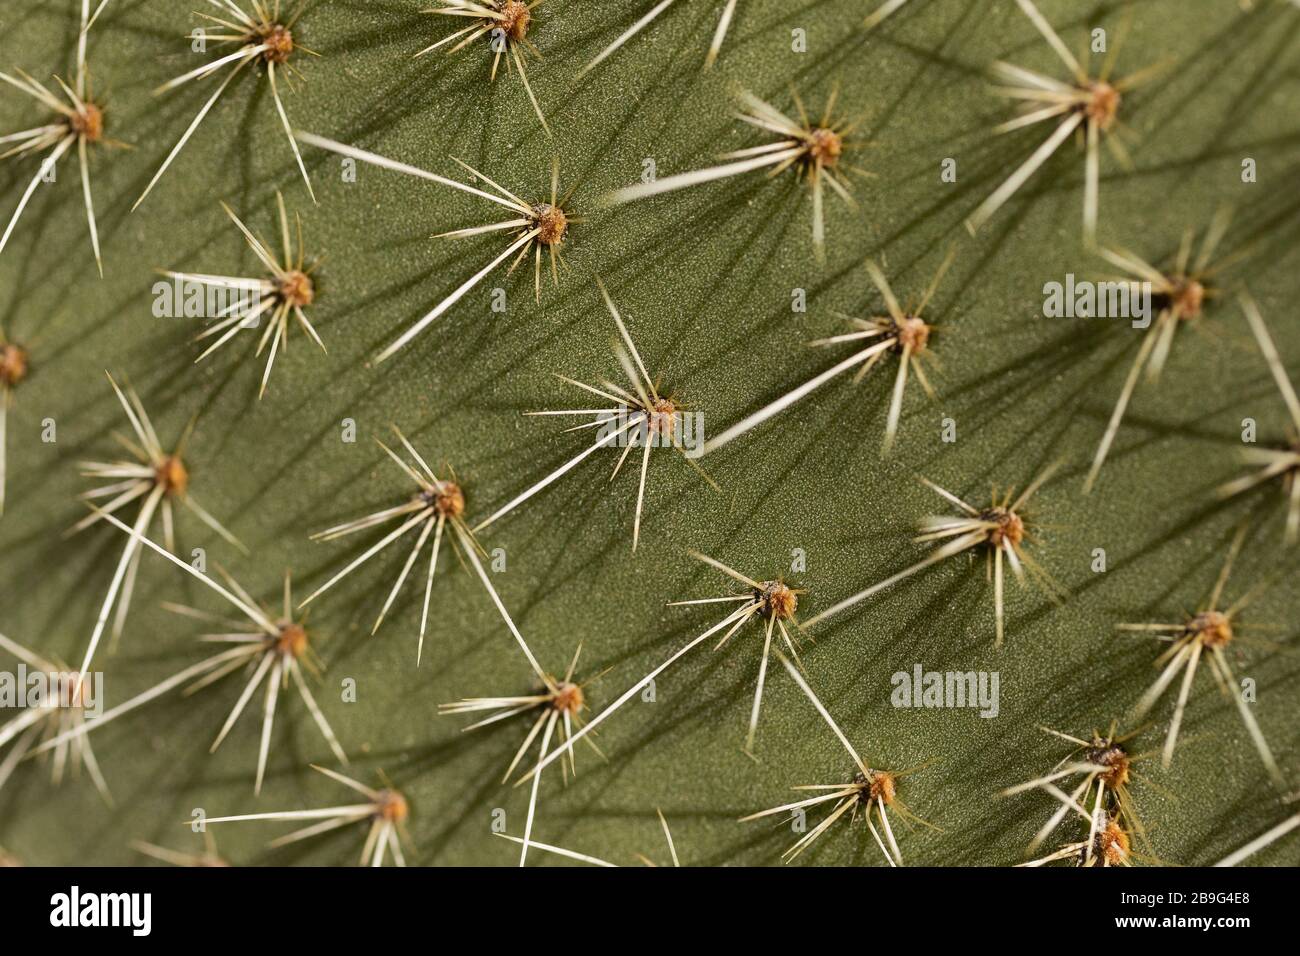 Extreme close up spiky green cactus leaf Stock Photo